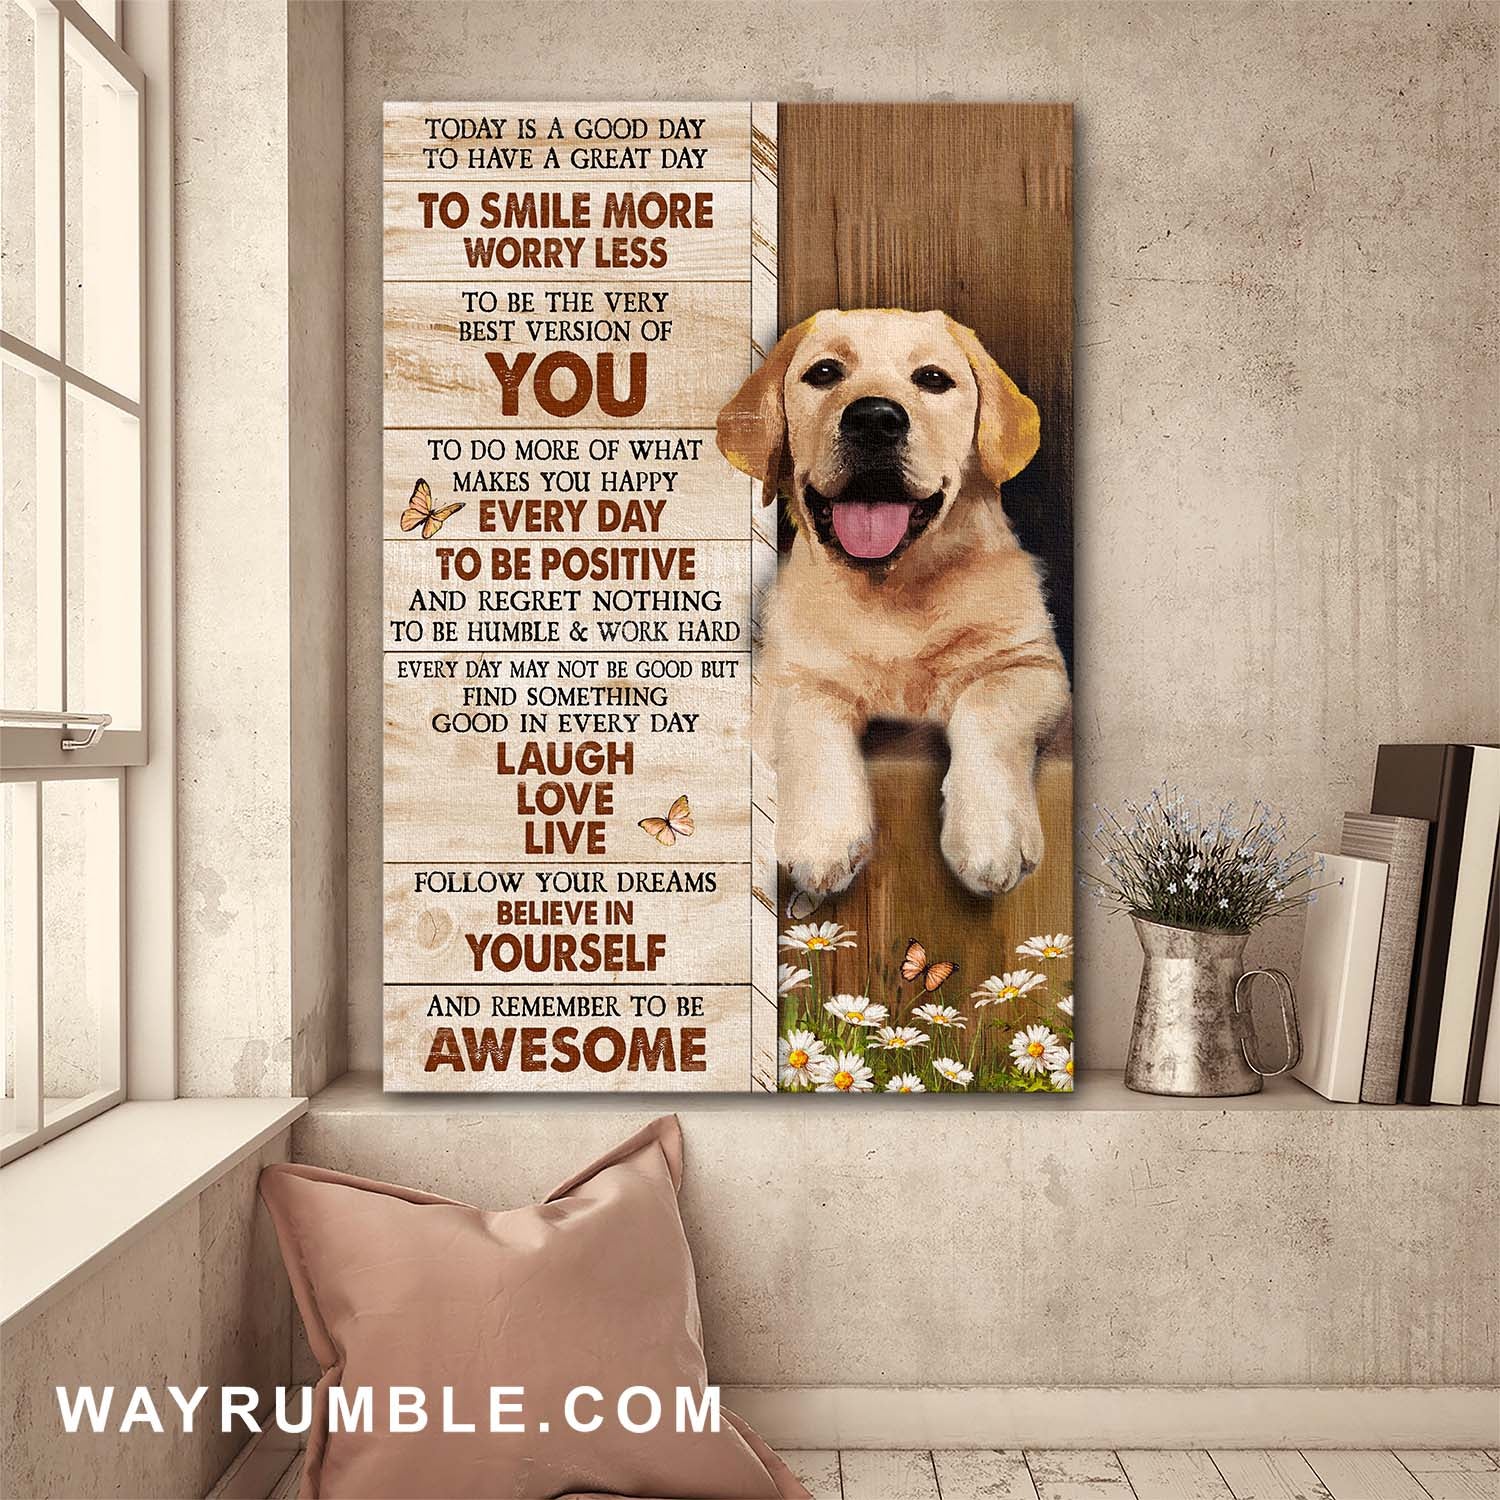 Yellow Labrador, Believe in yourself and remember to be awesome - Dog Portrait Canvas Prints, Wall Art